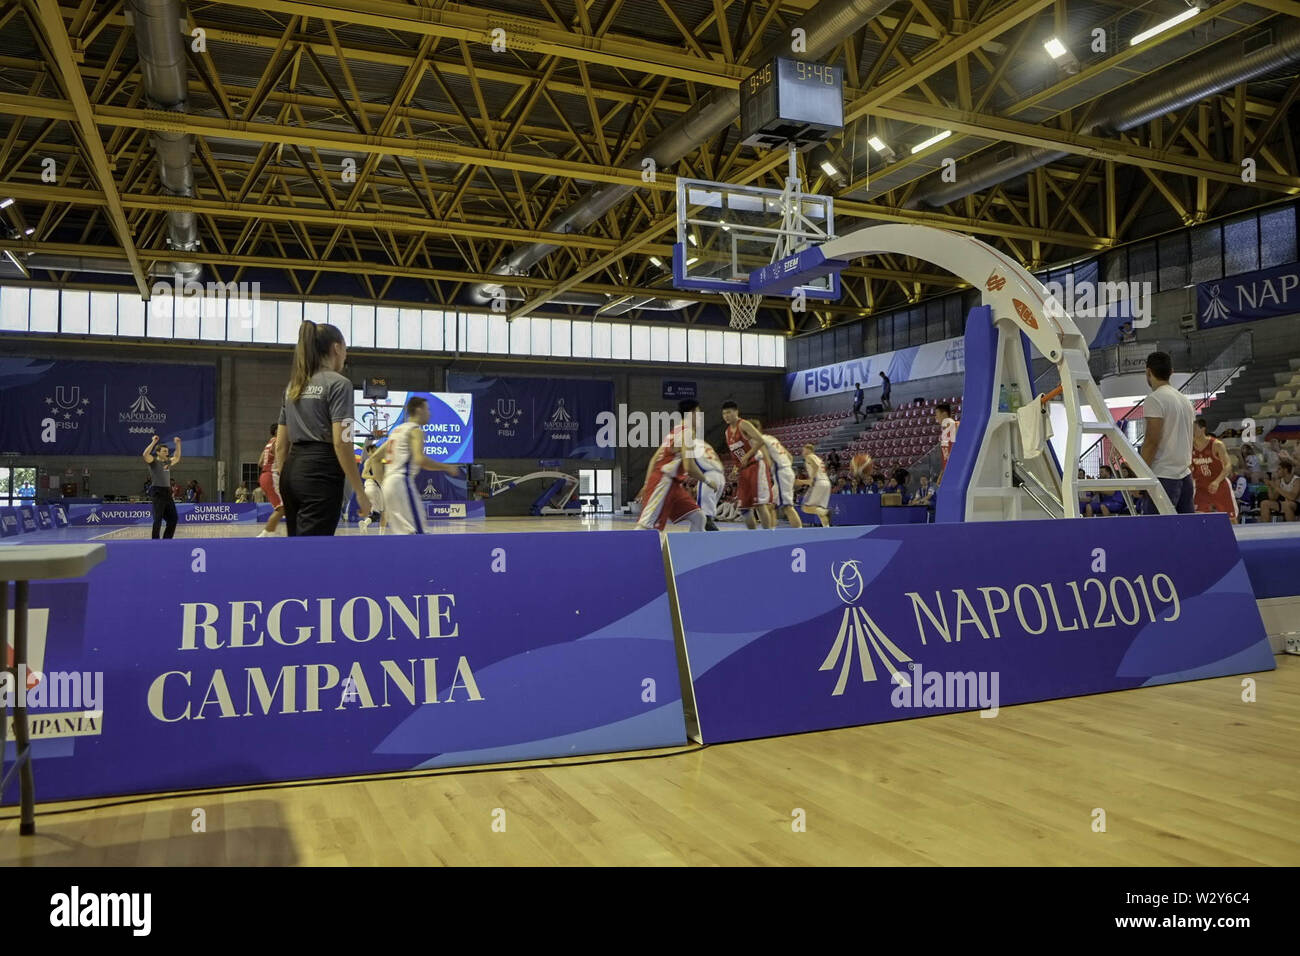 Aversa, Caserta, Italy. 11th July, 2019. 11/07/2019 Aversa, (ce).Naples Basketball Universiade China Russia.At the Palazzetto dello Sport of Aversa in the province of Caserta there is a Basketball meeting between China and Russia. Credit: Fabio Sasso/ZUMA Wire/Alamy Live News Stock Photo